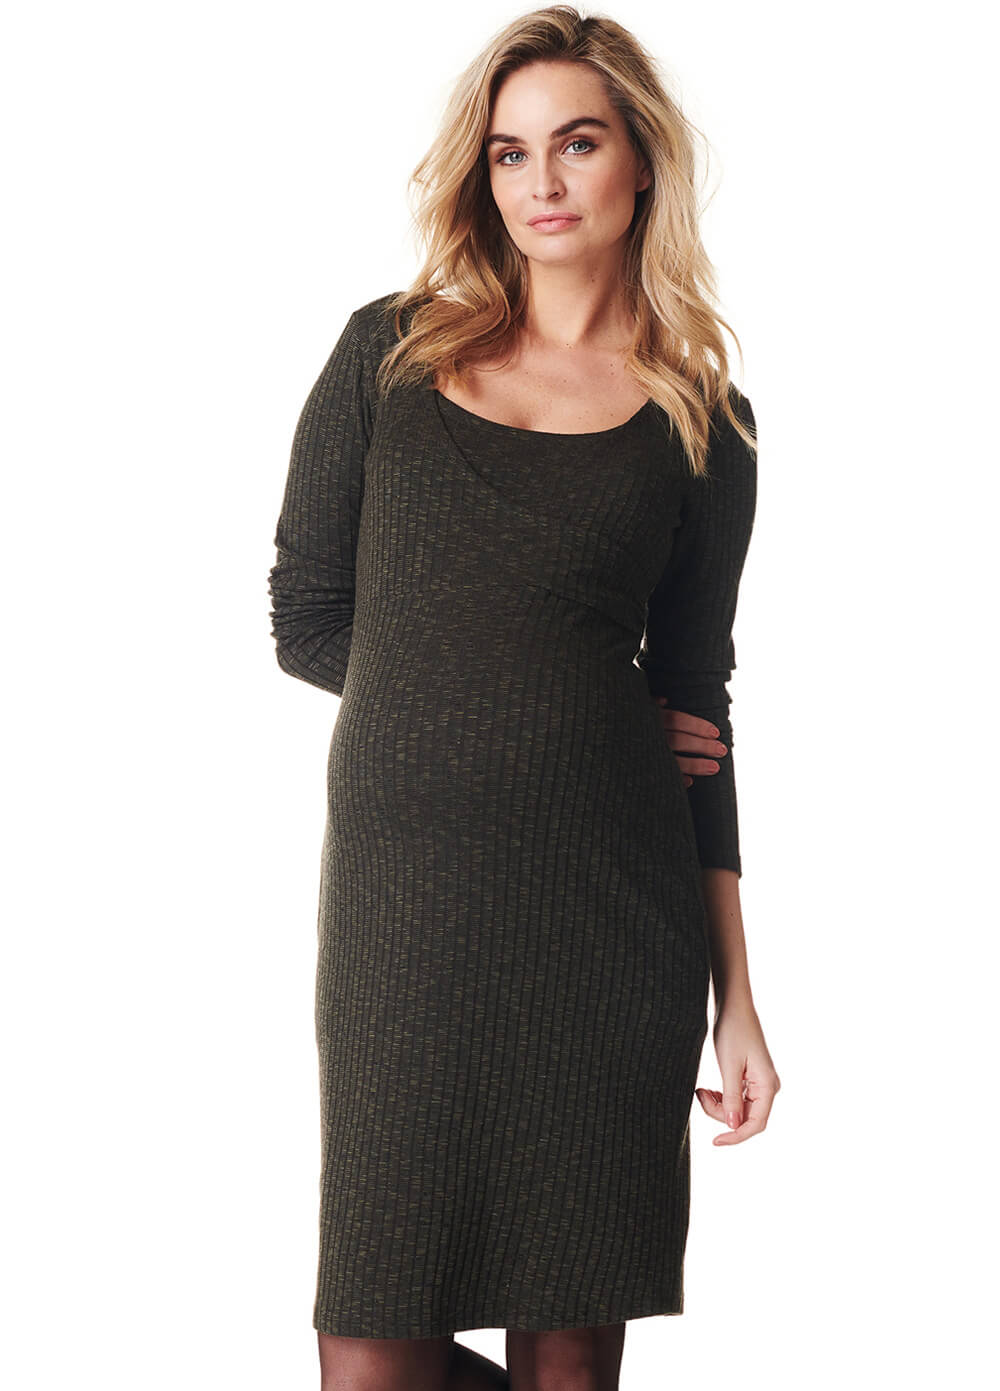 Queen Bee Giulia Maternity & Nursing Knit Dress in Army by Noppies